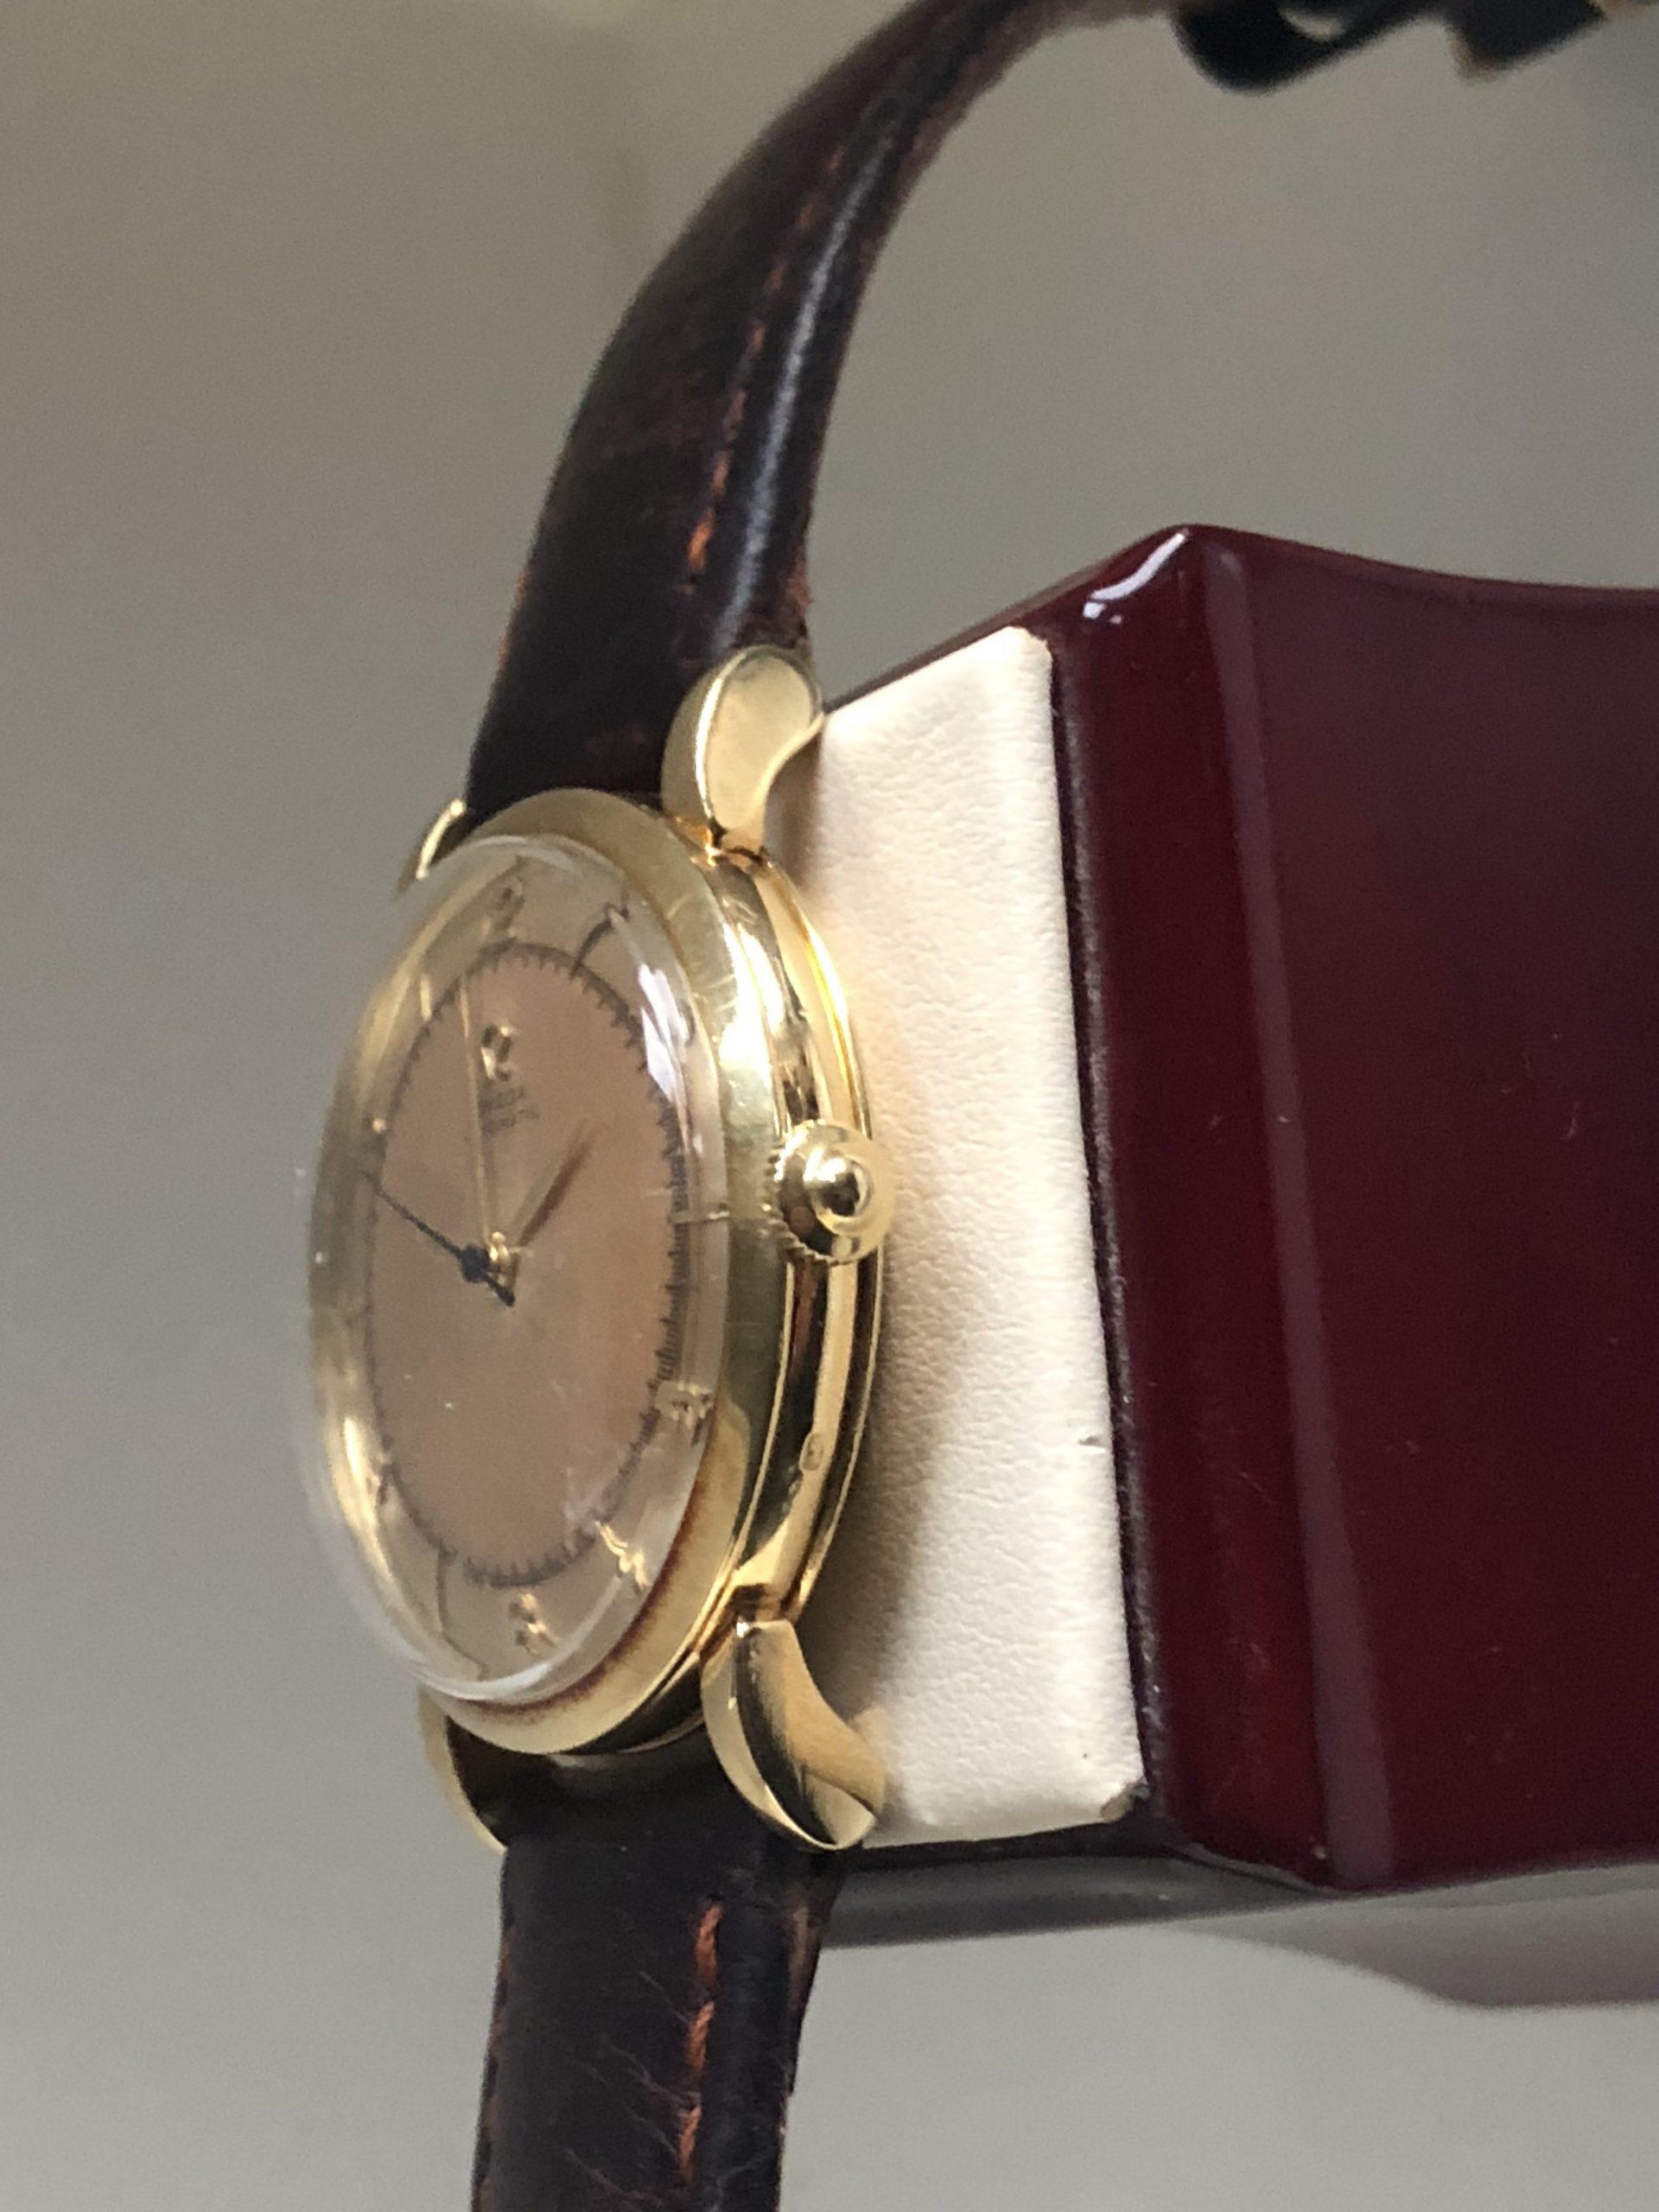 1946 18k Gold Omega Bumper Automatic Watch with Two-Tone Dial and Blued ...